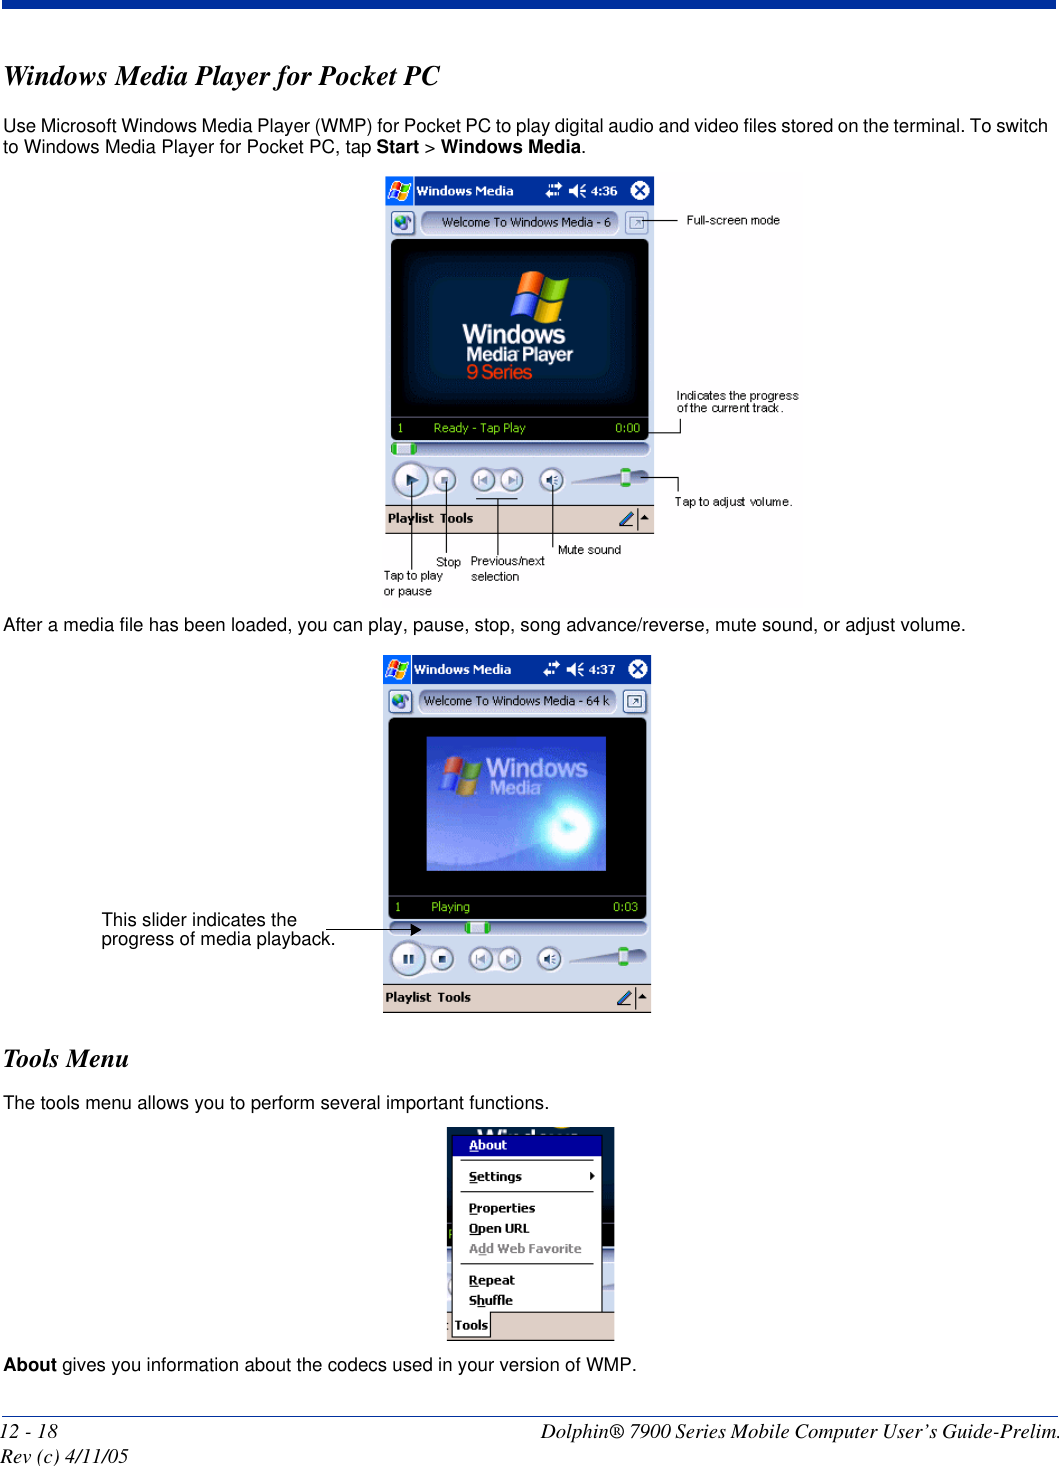 12 - 18 Dolphin® 7900 Series Mobile Computer User’s Guide-Prelim. Rev (c) 4/11/05Windows Media Player for Pocket PCUse Microsoft Windows Media Player (WMP) for Pocket PC to play digital audio and video files stored on the terminal. To switch to Windows Media Player for Pocket PC, tap Start &gt; Windows Media.After a media file has been loaded, you can play, pause, stop, song advance/reverse, mute sound, or adjust volume. Tools MenuThe tools menu allows you to perform several important functions. About gives you information about the codecs used in your version of WMP.This slider indicates the progress of media playback.